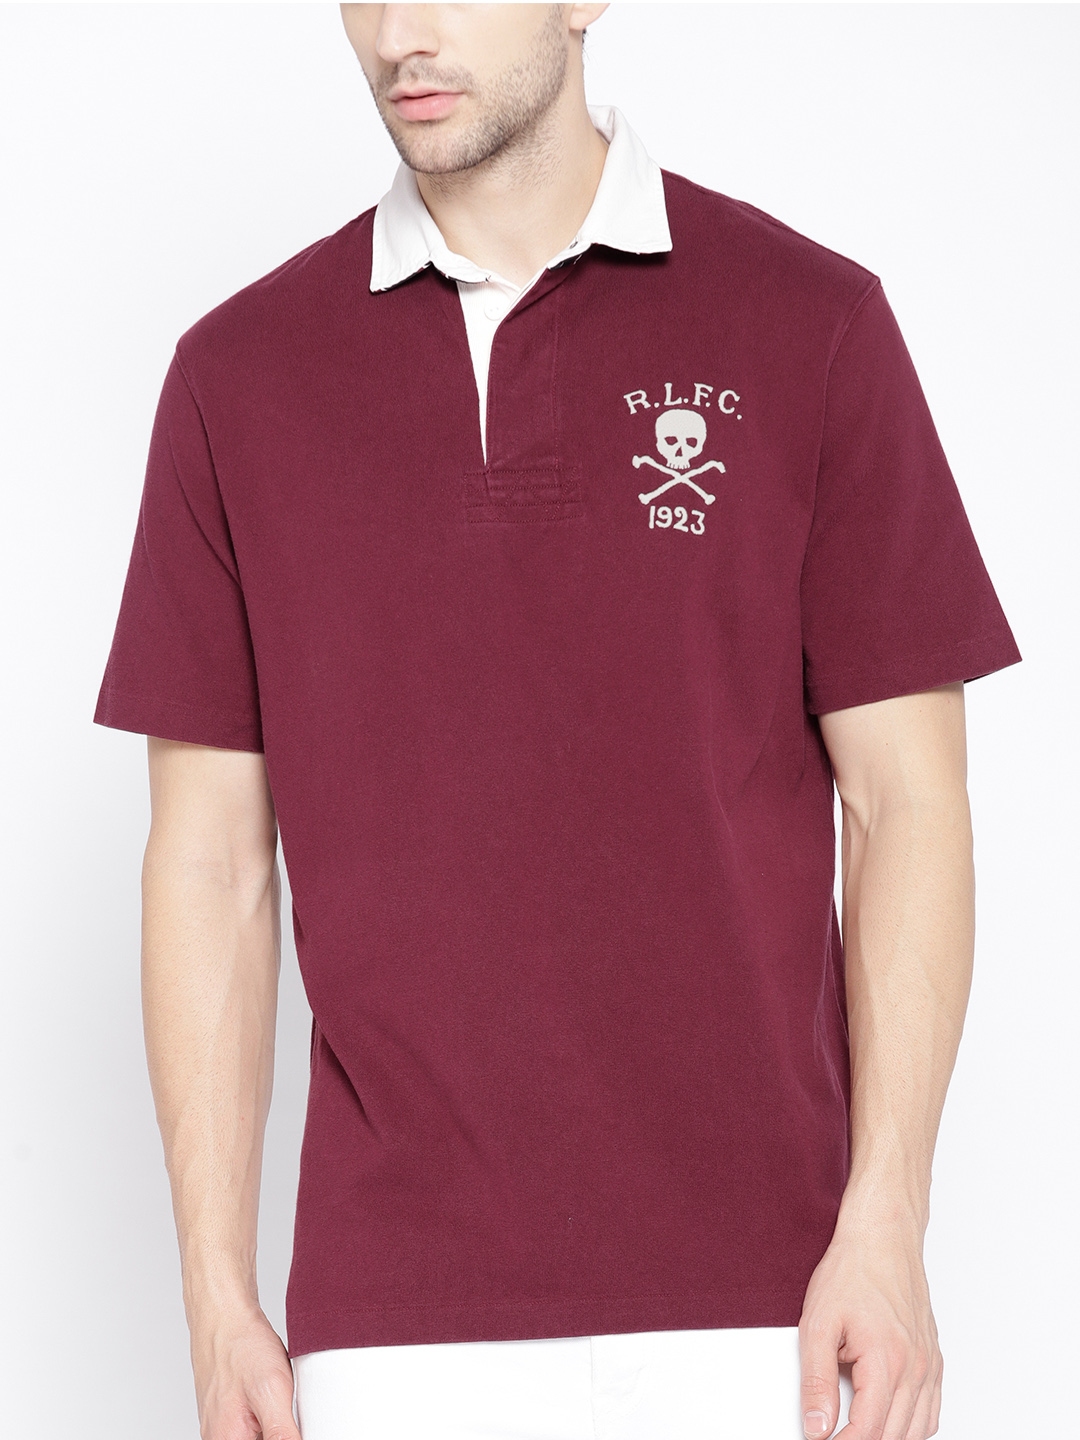 classic fit cotton rugby shirt